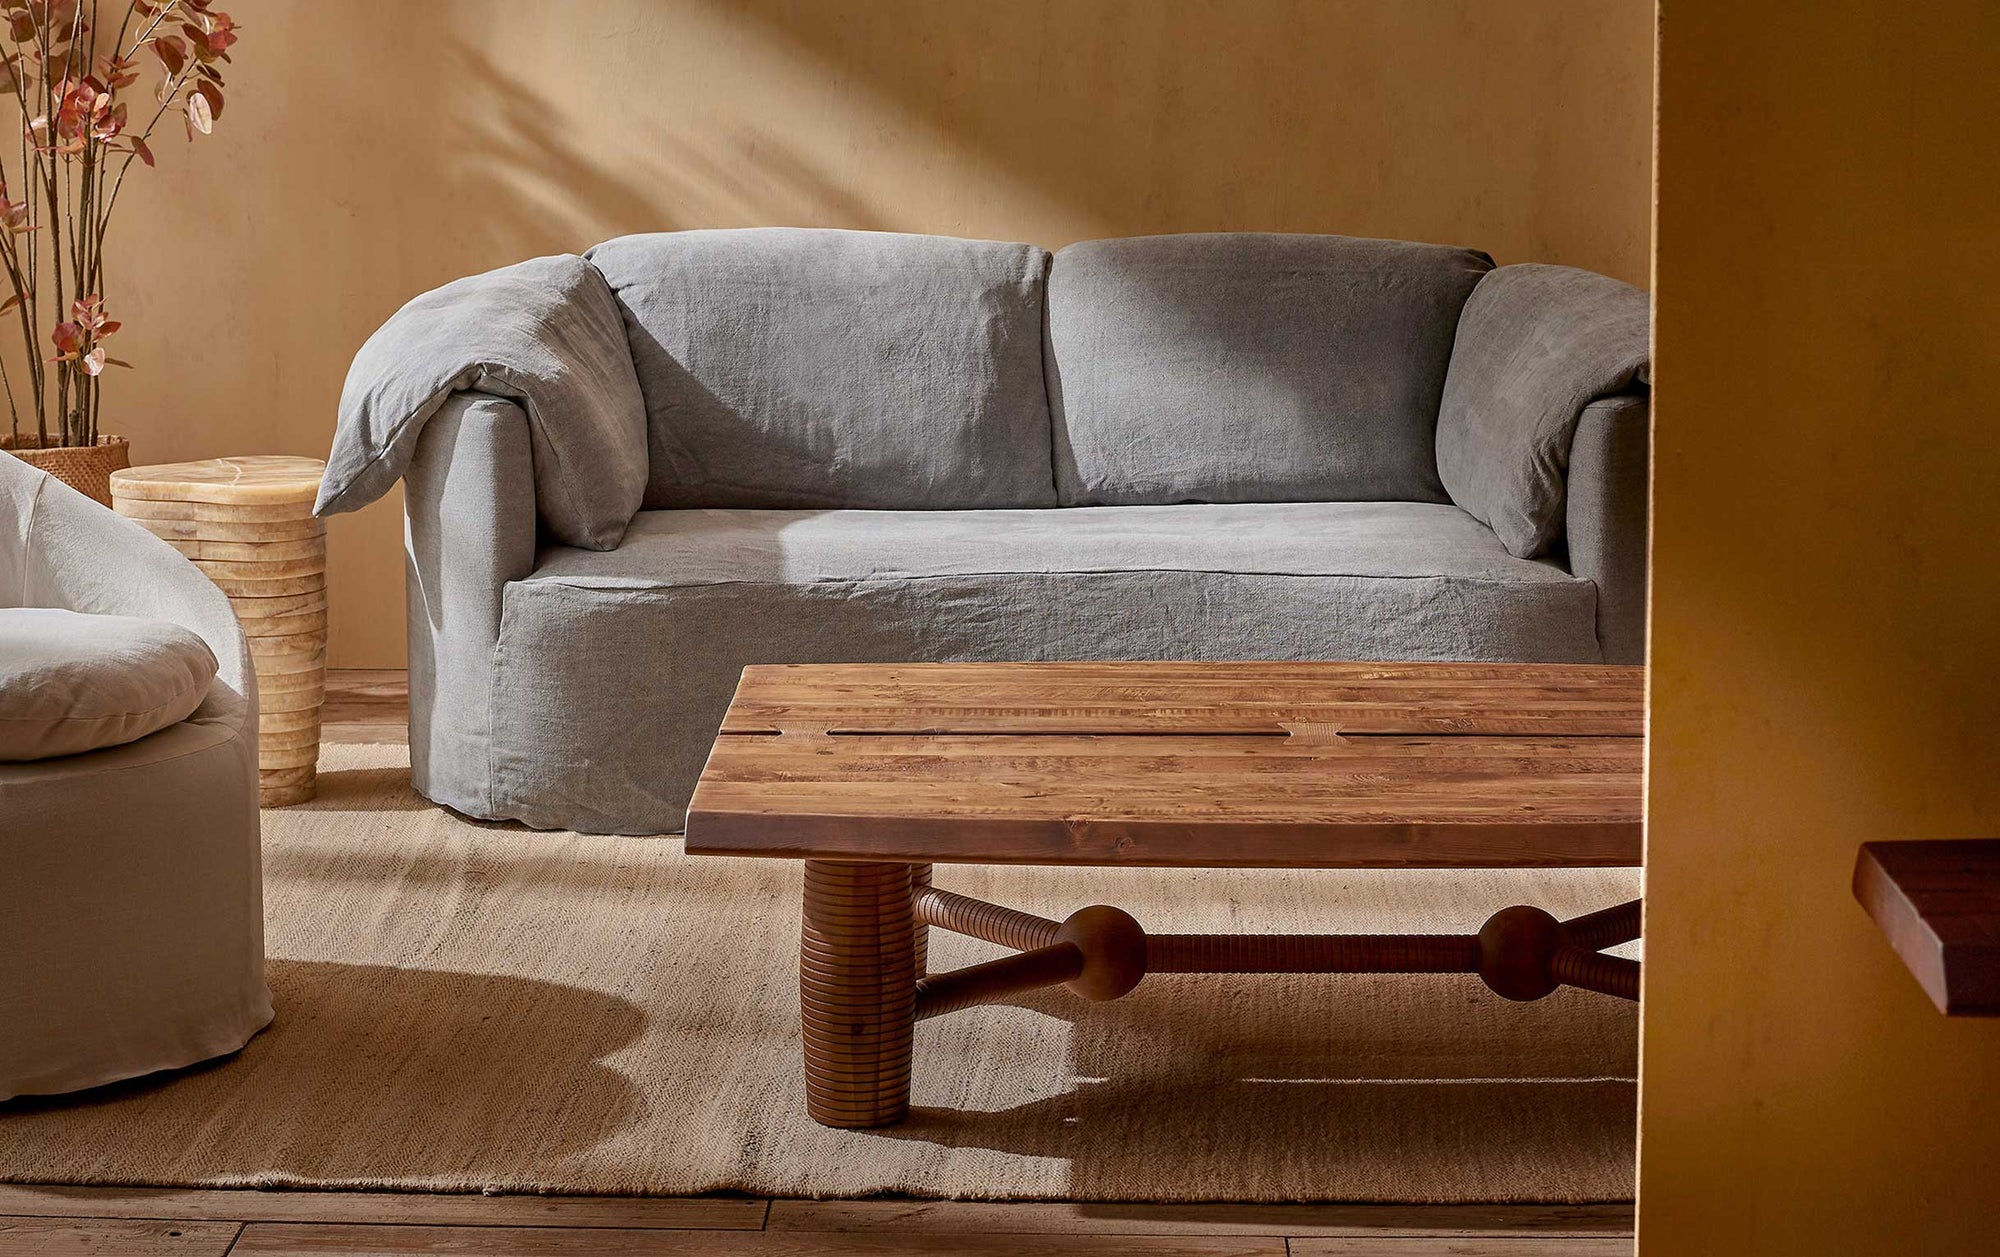 A Zenia Coffee Table in Heritage Pine is placed in front of the Loula Sofa and Ozzi Chair